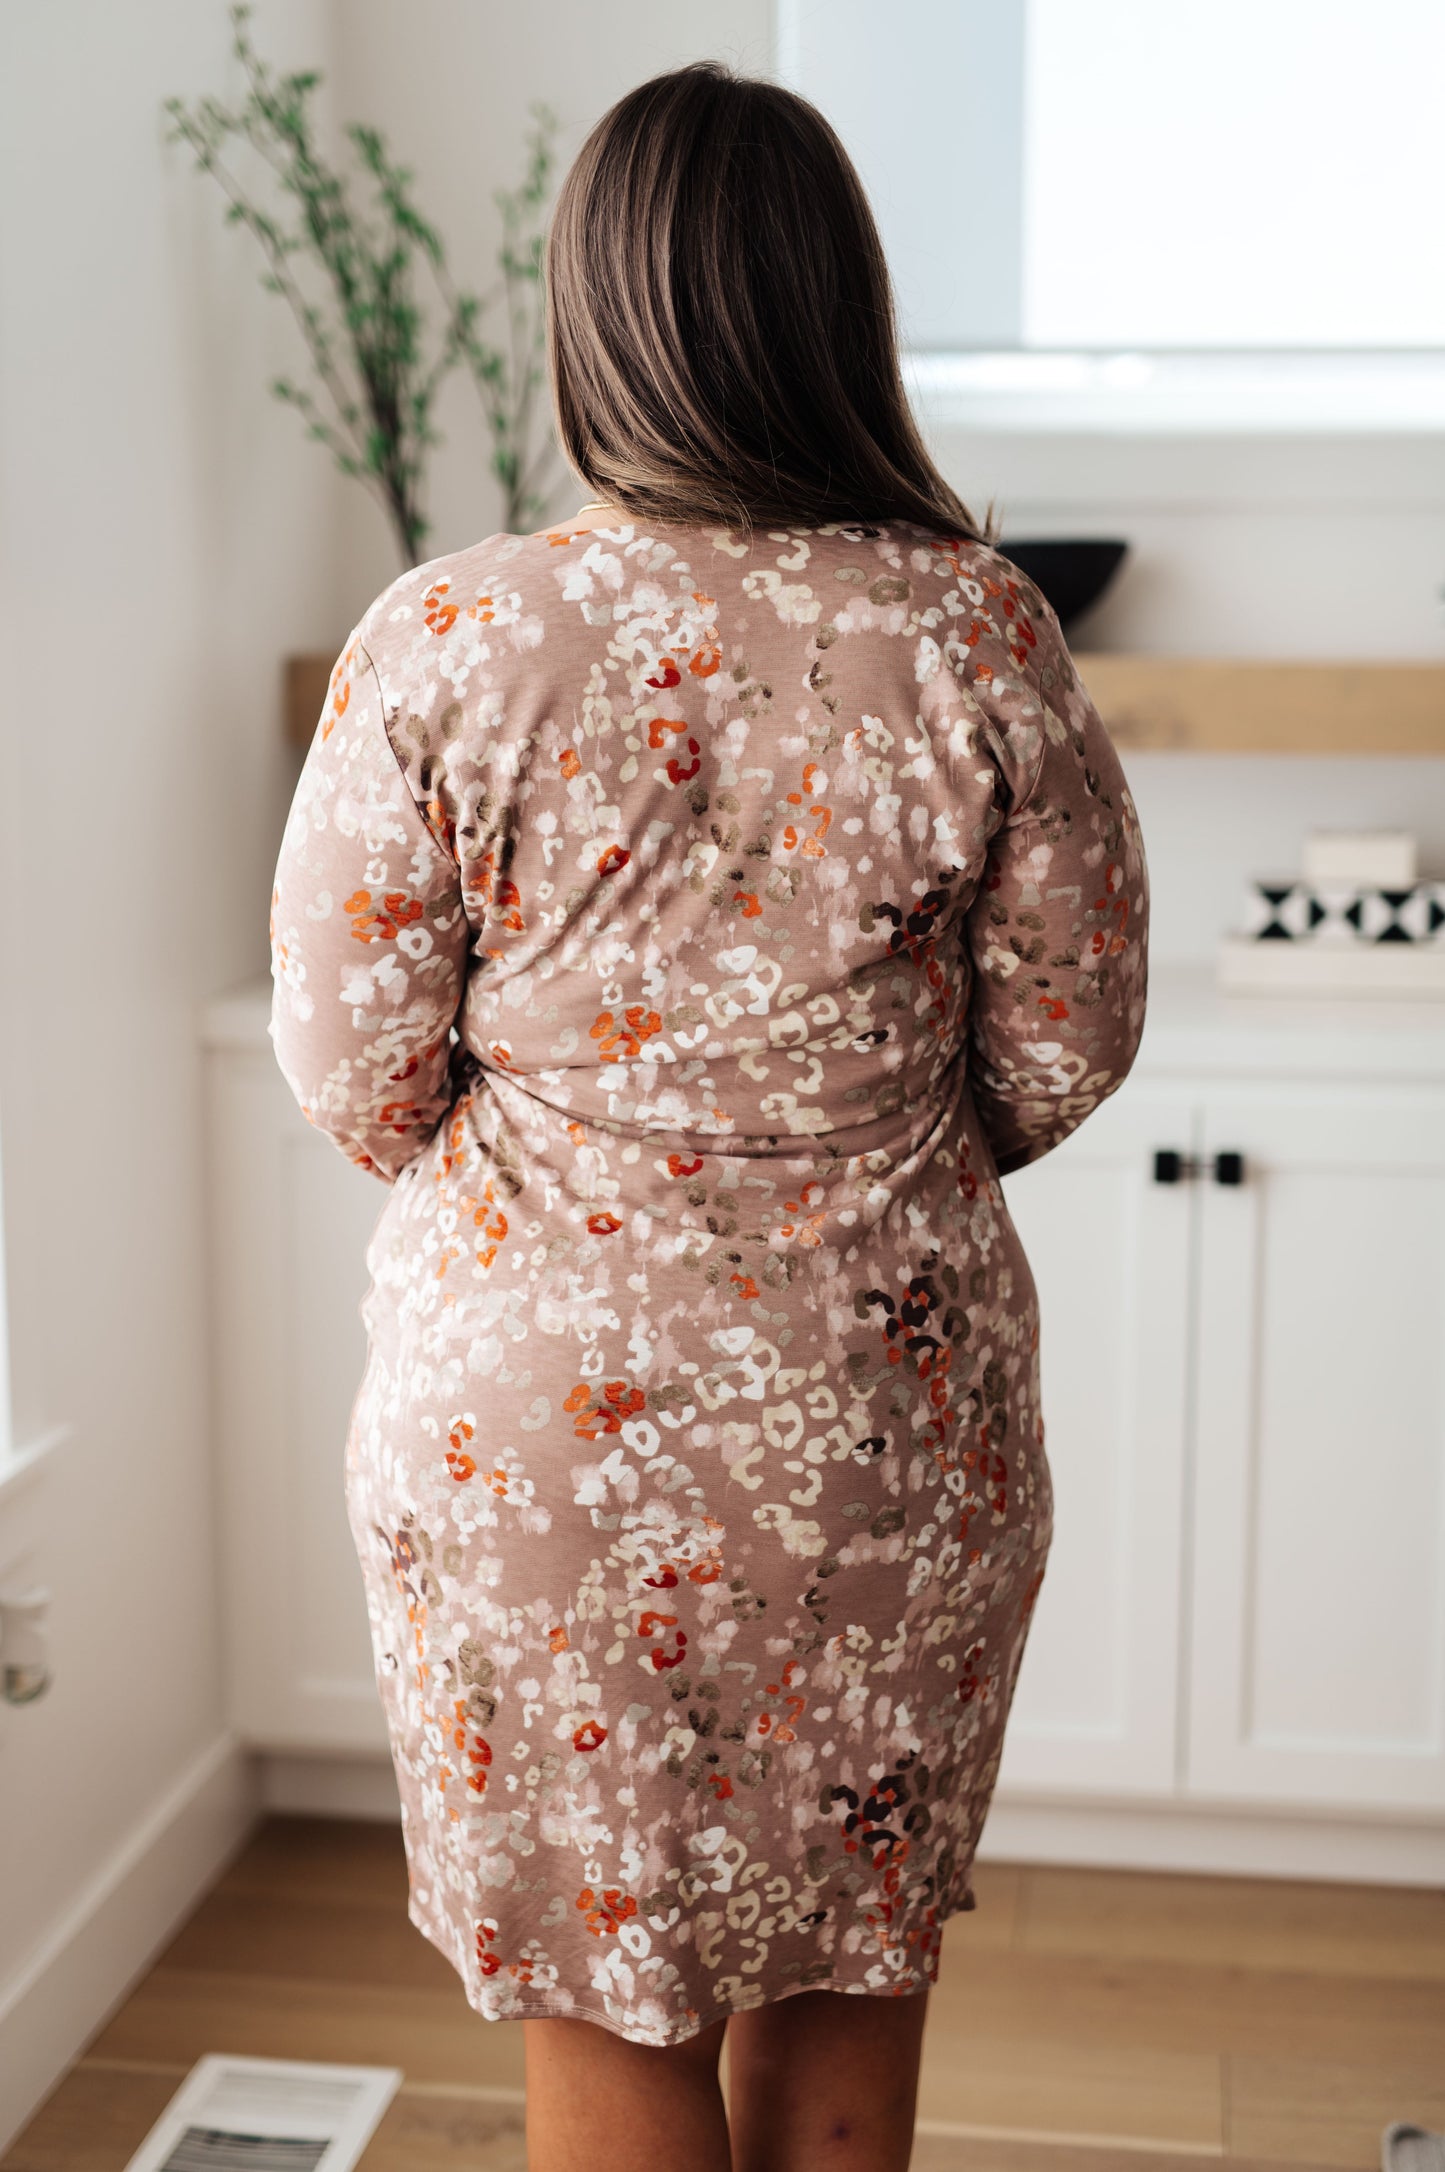 Honey Do I Ever Faux Wrap Dress in Taupe - Three Bears Boutique